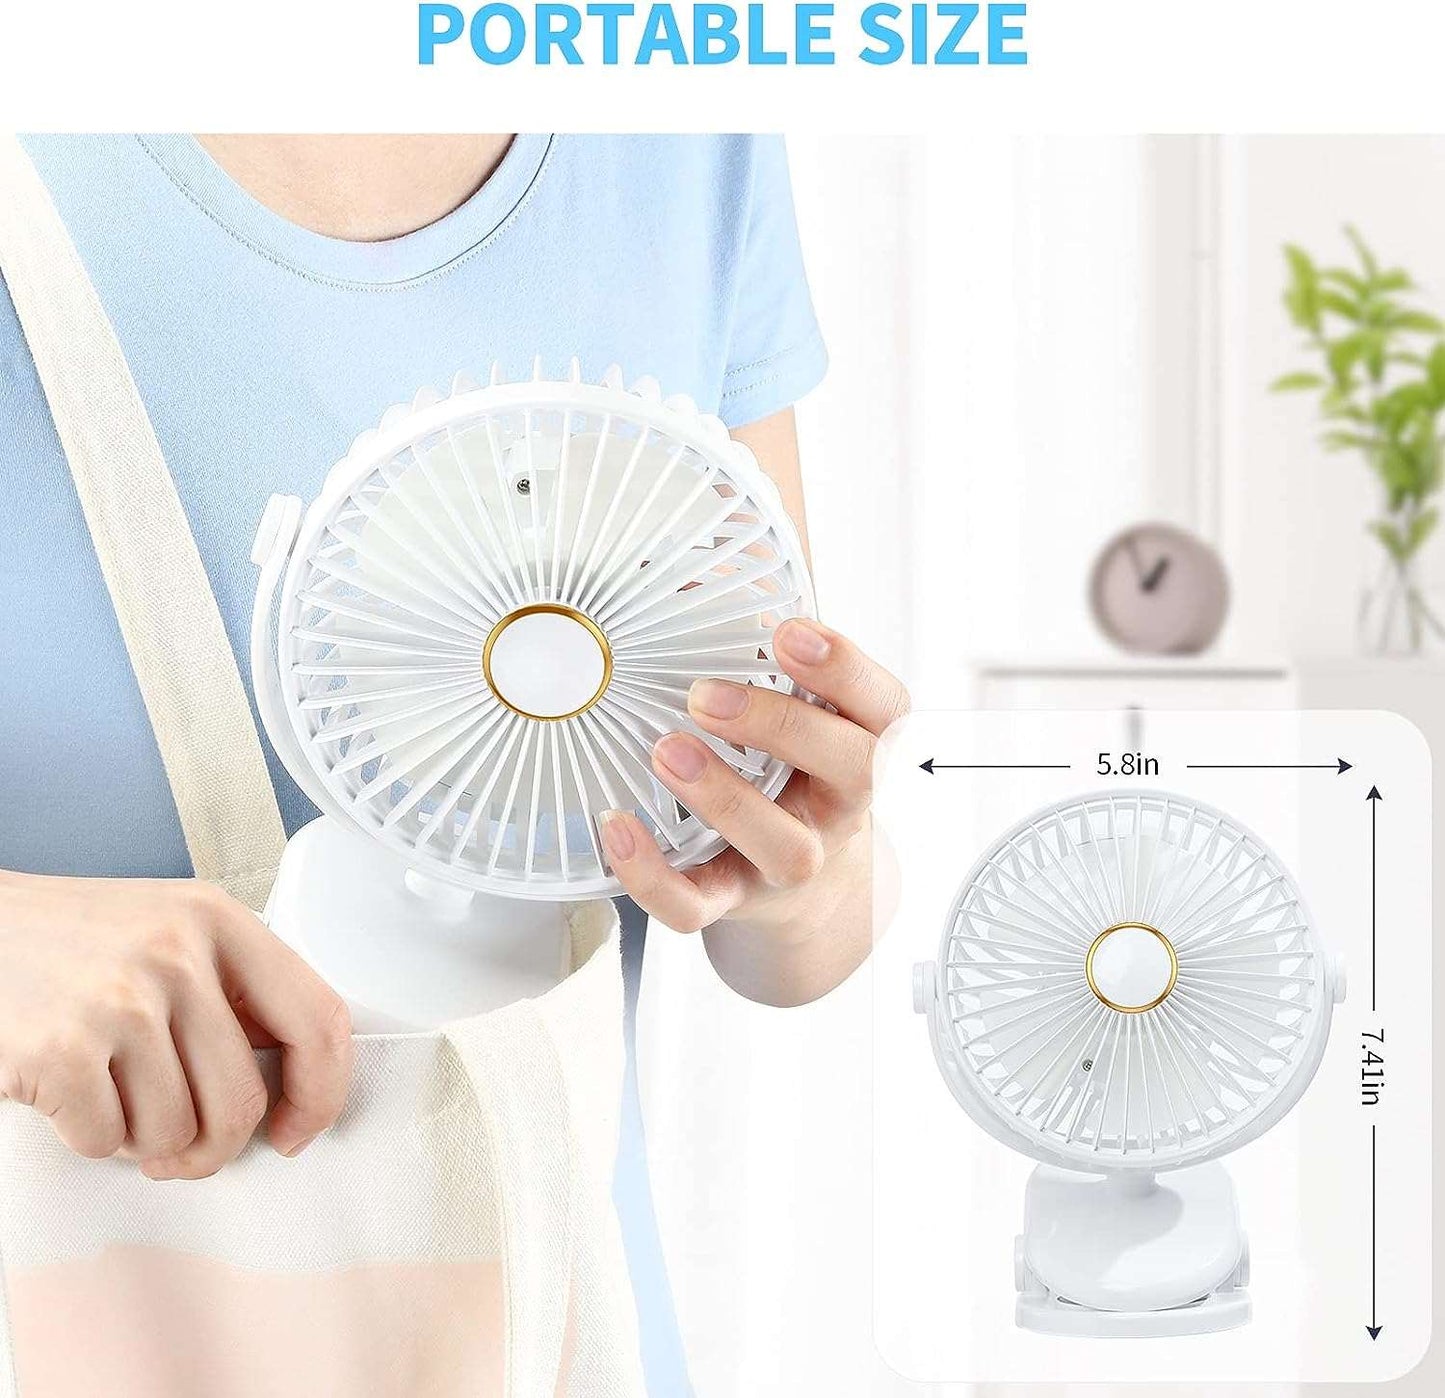 SmartDevil Clip on Fan, 360° Rotation Portable Small Desk Fan, 3 Speed Personal Rechargeable Battery Operated Table Fan with Clip, Mini Clip Fan for Stroller, Camping, Office, Desk(White)